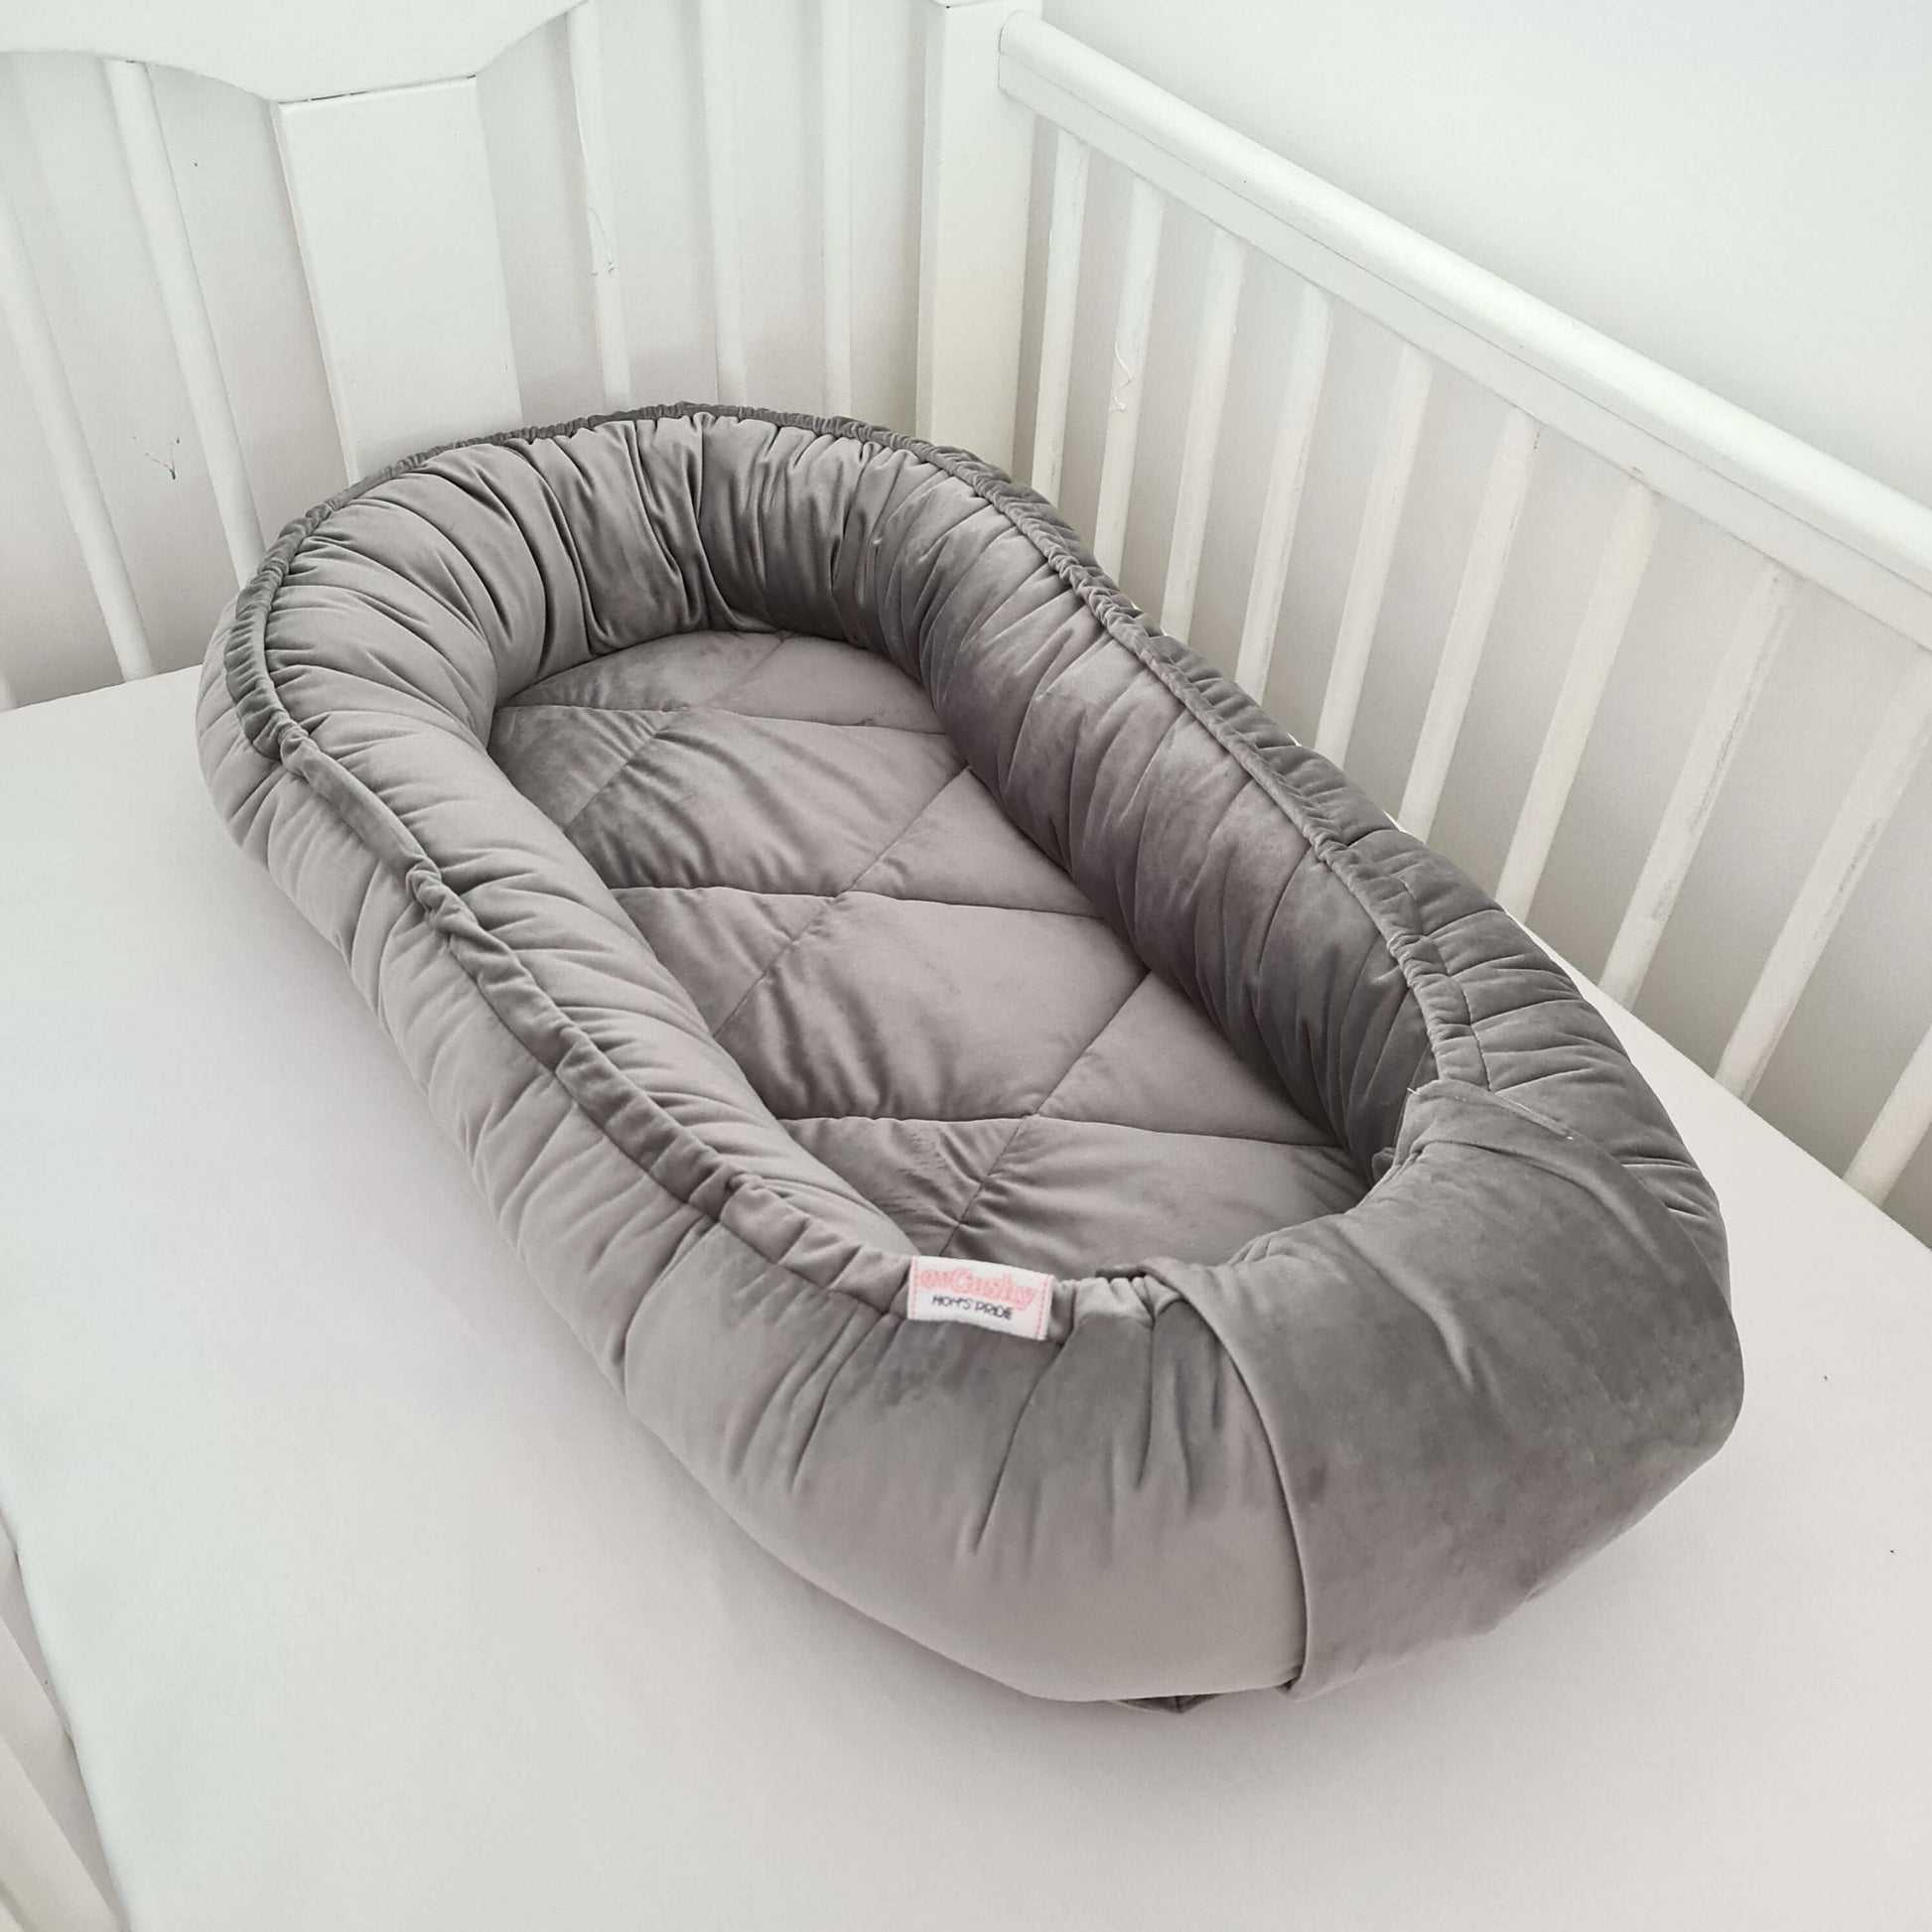 luxurious best nest in Ireland cosy cushion for infant baby pod lounger travel bed